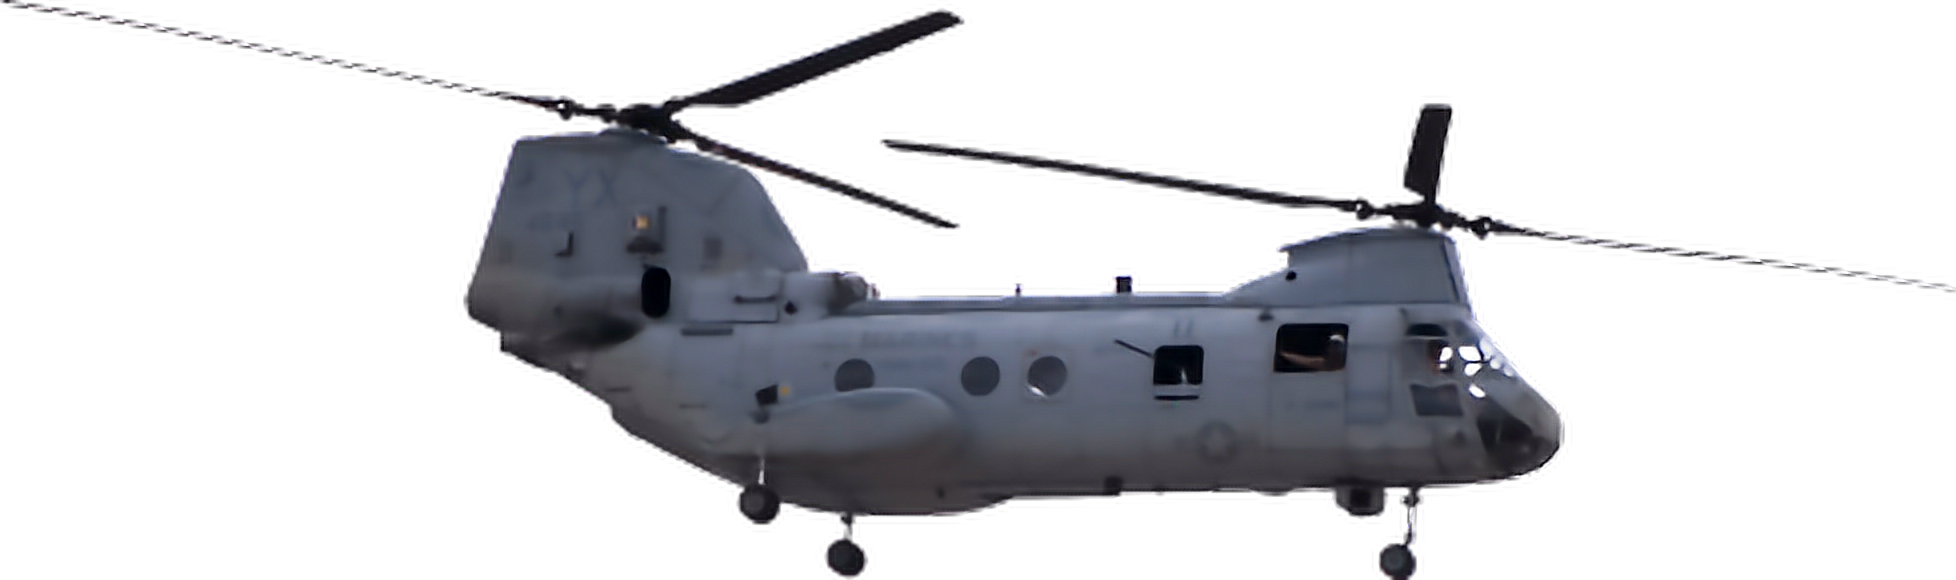 Army Helicopter Background PNG Image